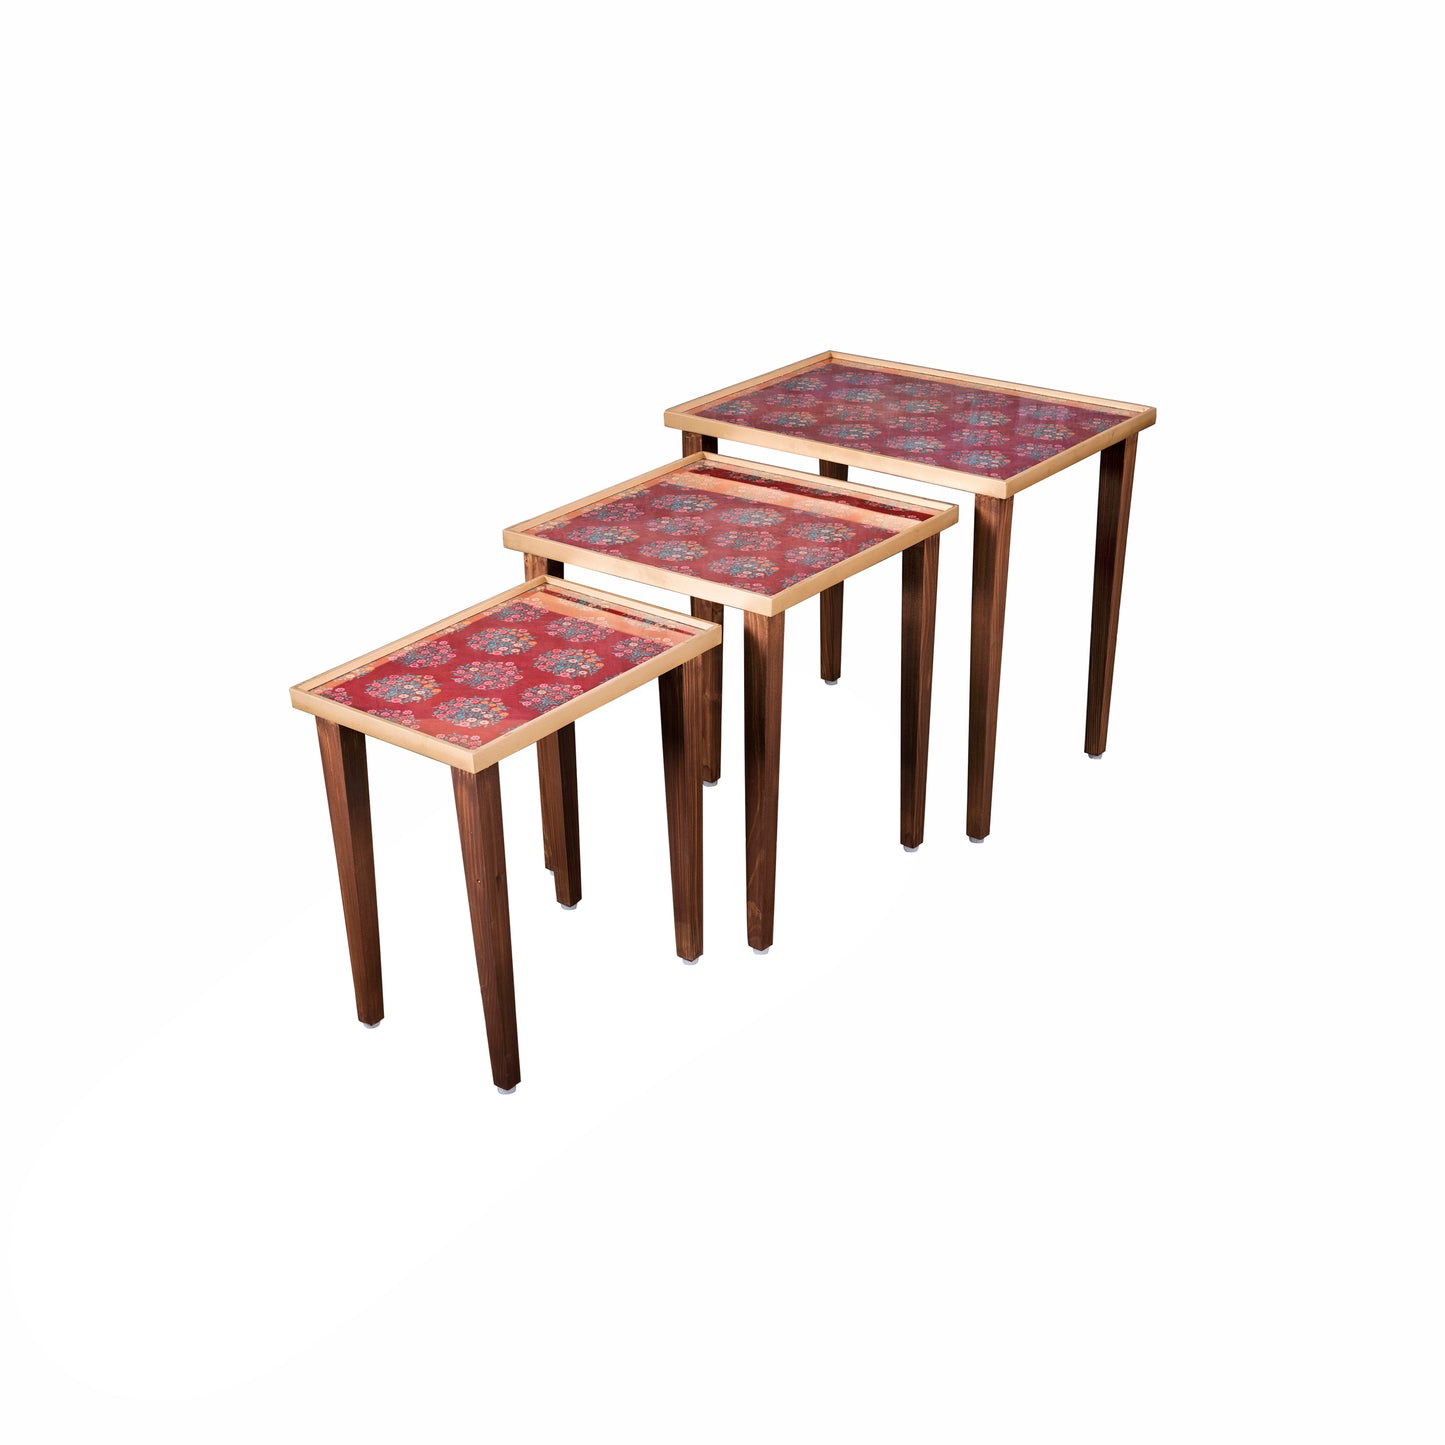 A Tiny Mistake Peach Floral Motifs Wooden Rectangle Nesting Tables (Set of 3), Living Room Decor